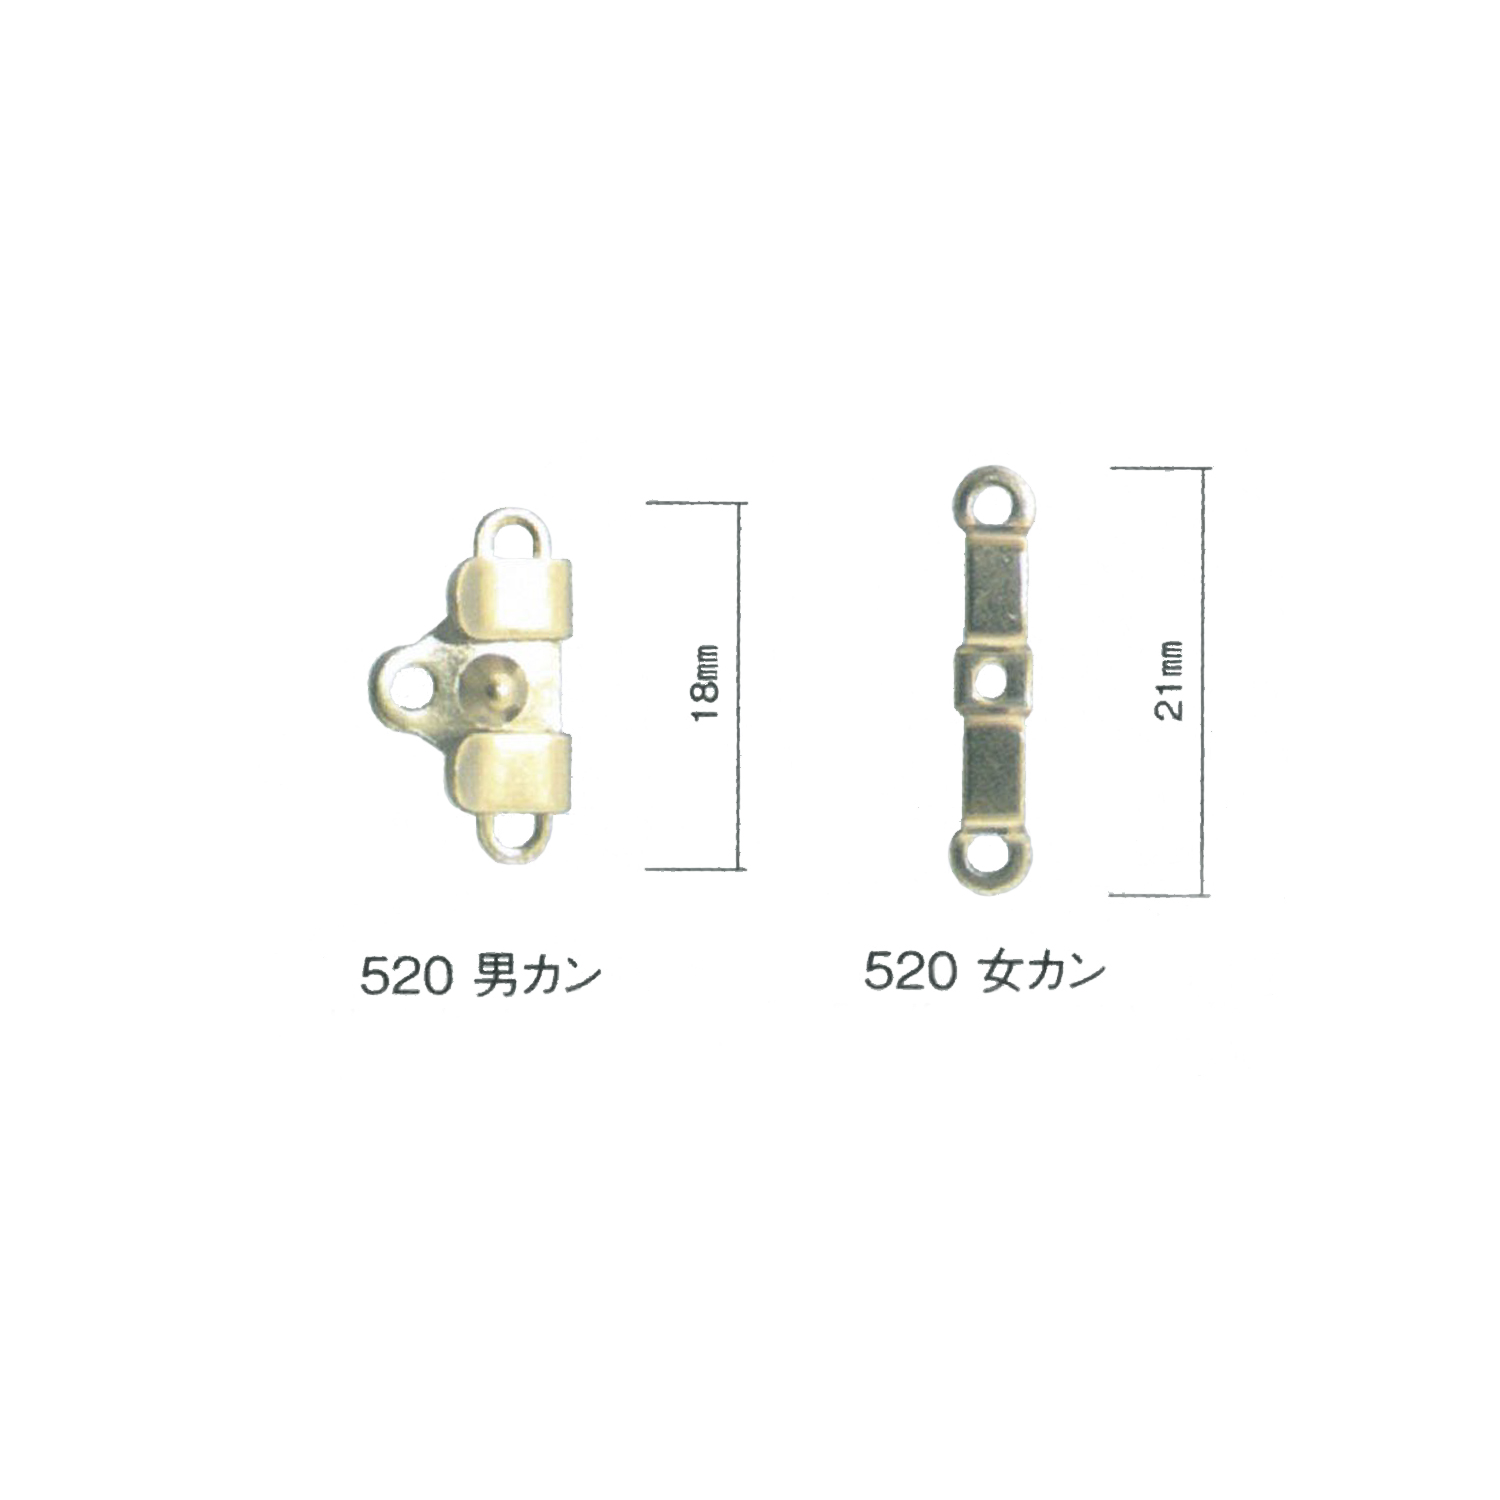 520K Front Hook (Hook And Eye Closure) * Needle Detector Compatible And With Sewing Machine Morito